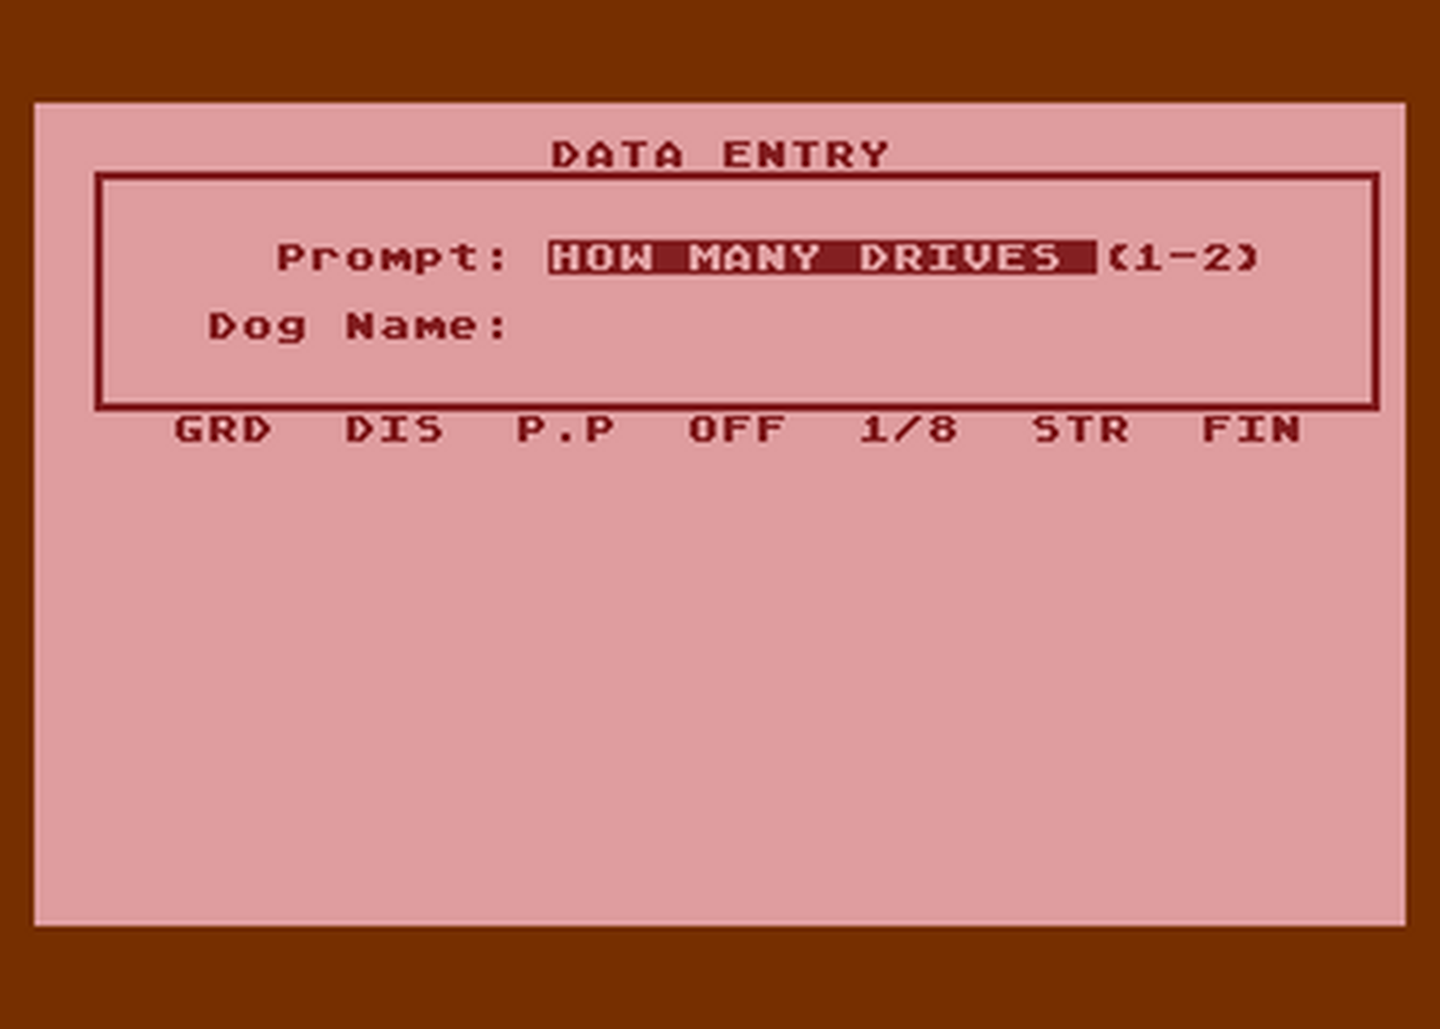 Atari GameBase Going_to_the_Dogs! APX 1982